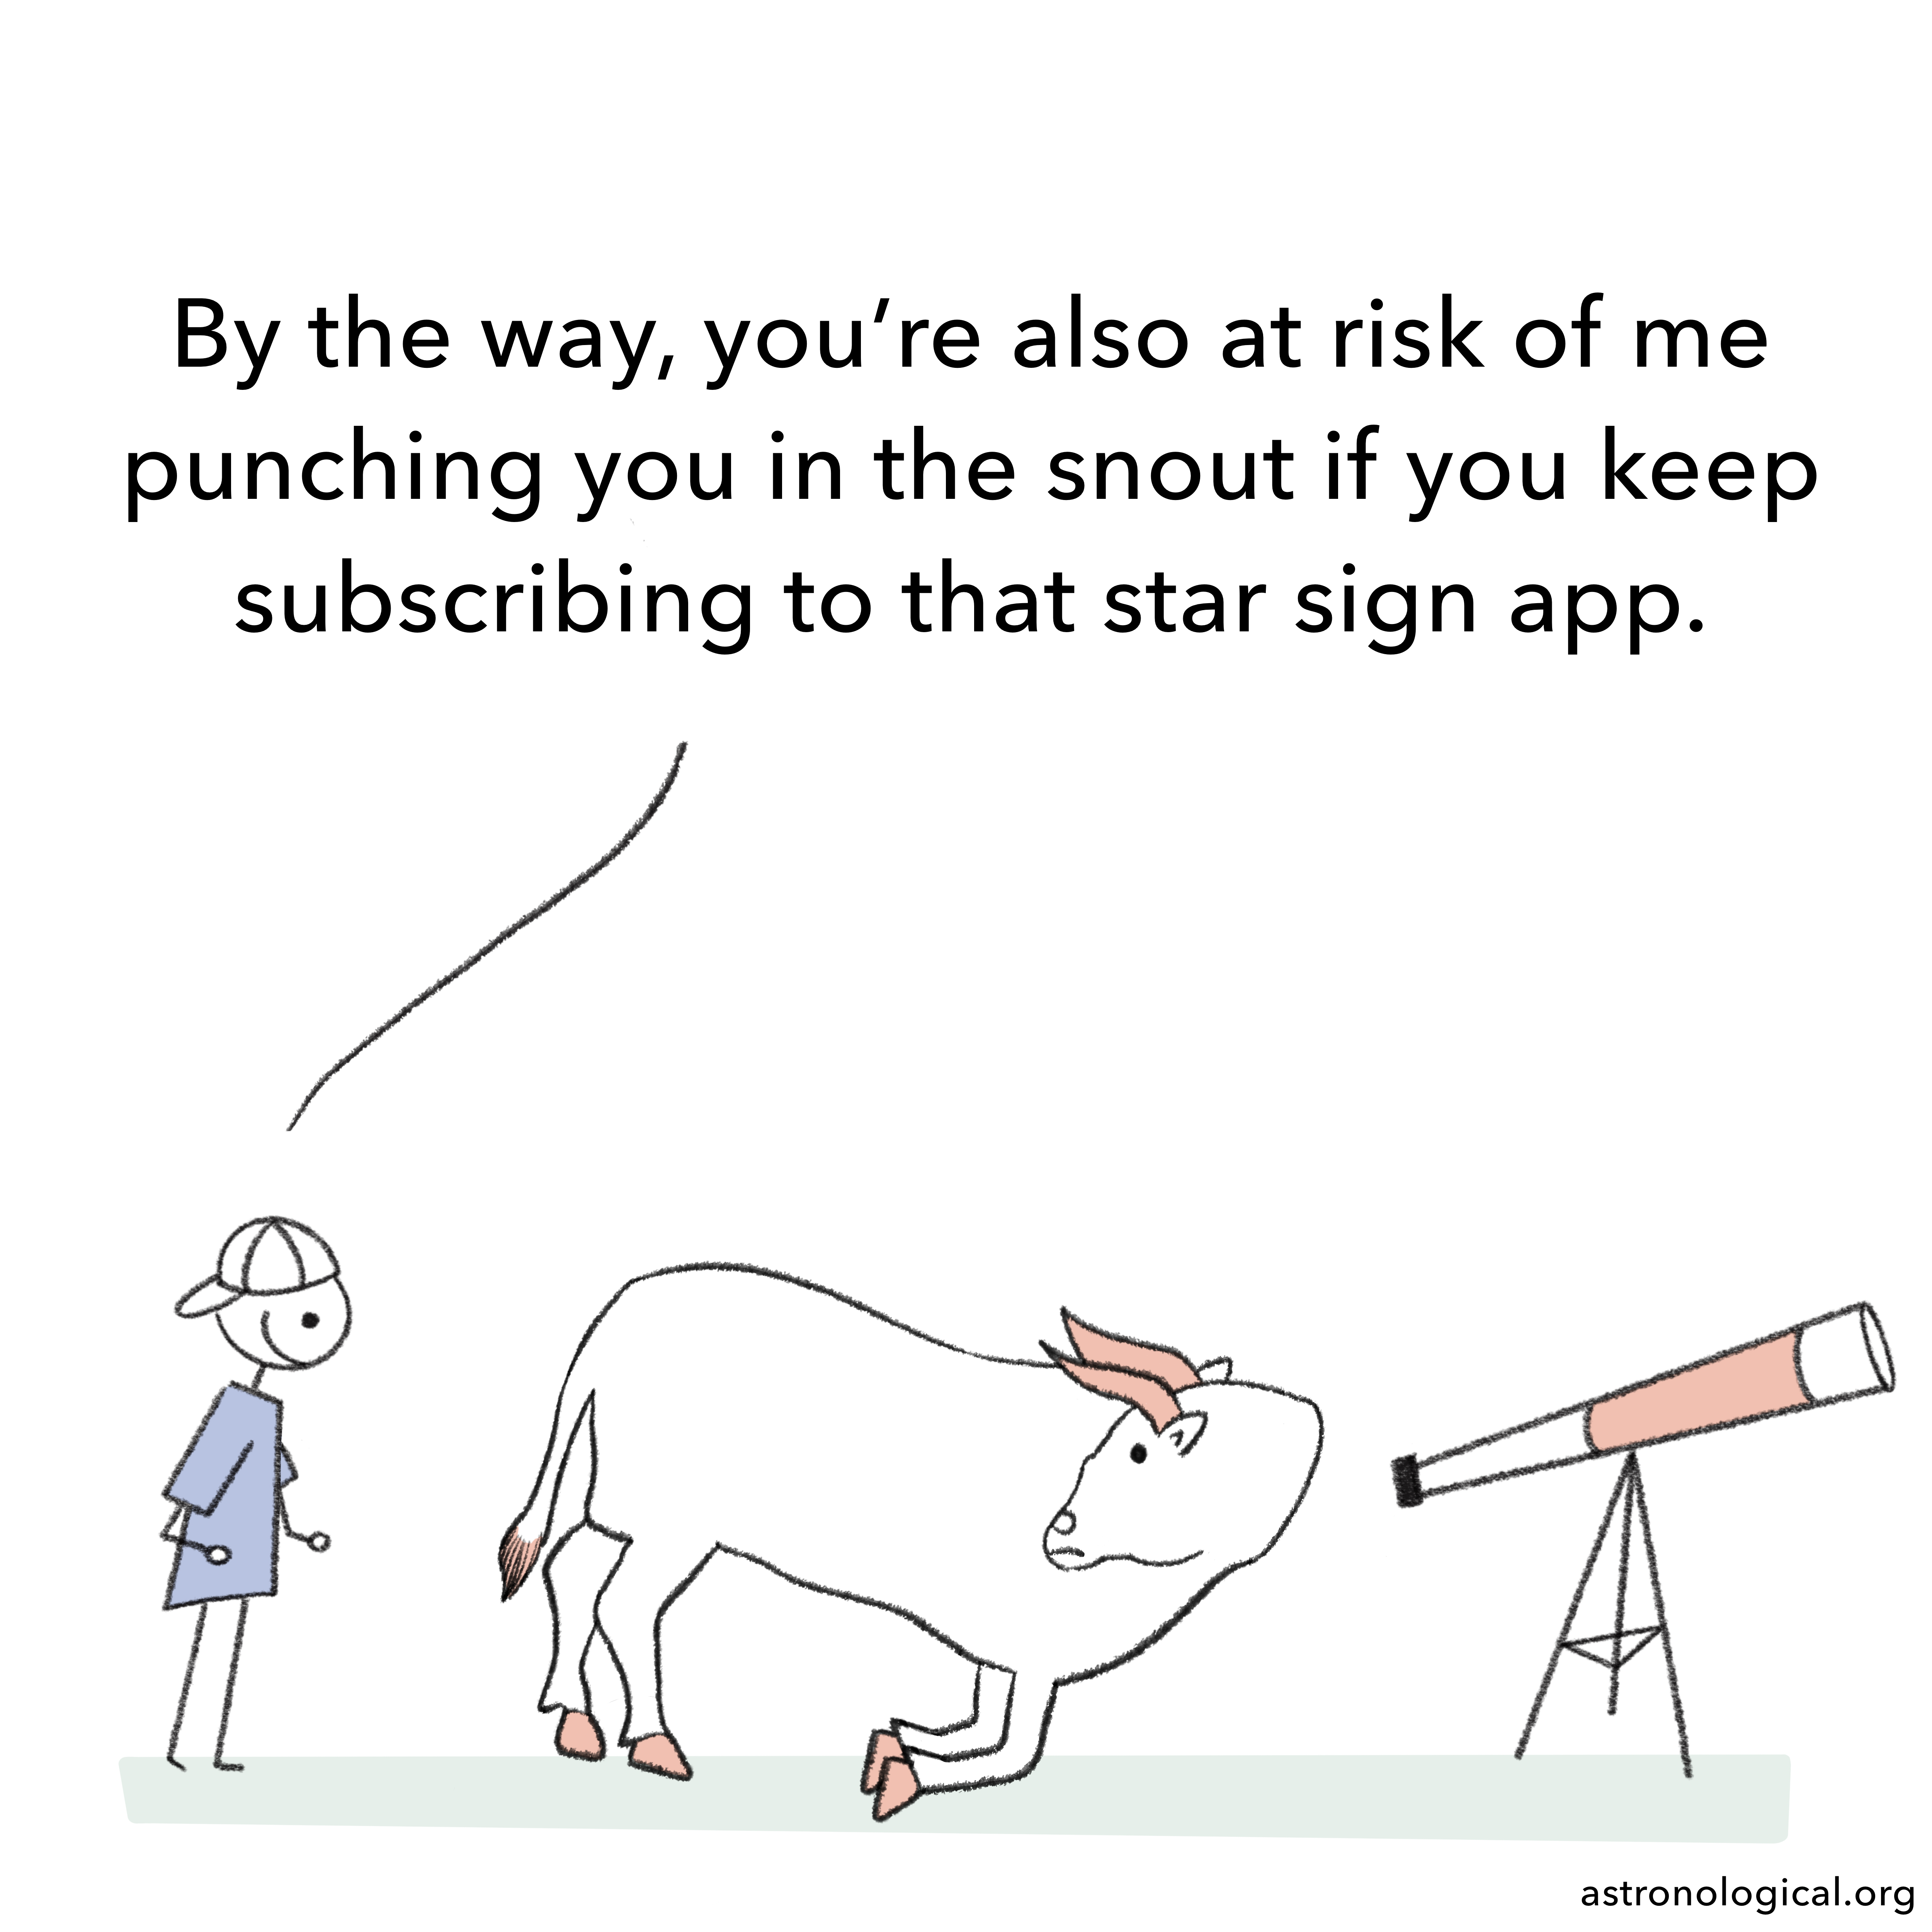 The guy adds: By the way, you’re also at risk of me punching you in the snout if you keep subscribing to that star sign app. The bull has turned its face around to look at the guy, surprised.